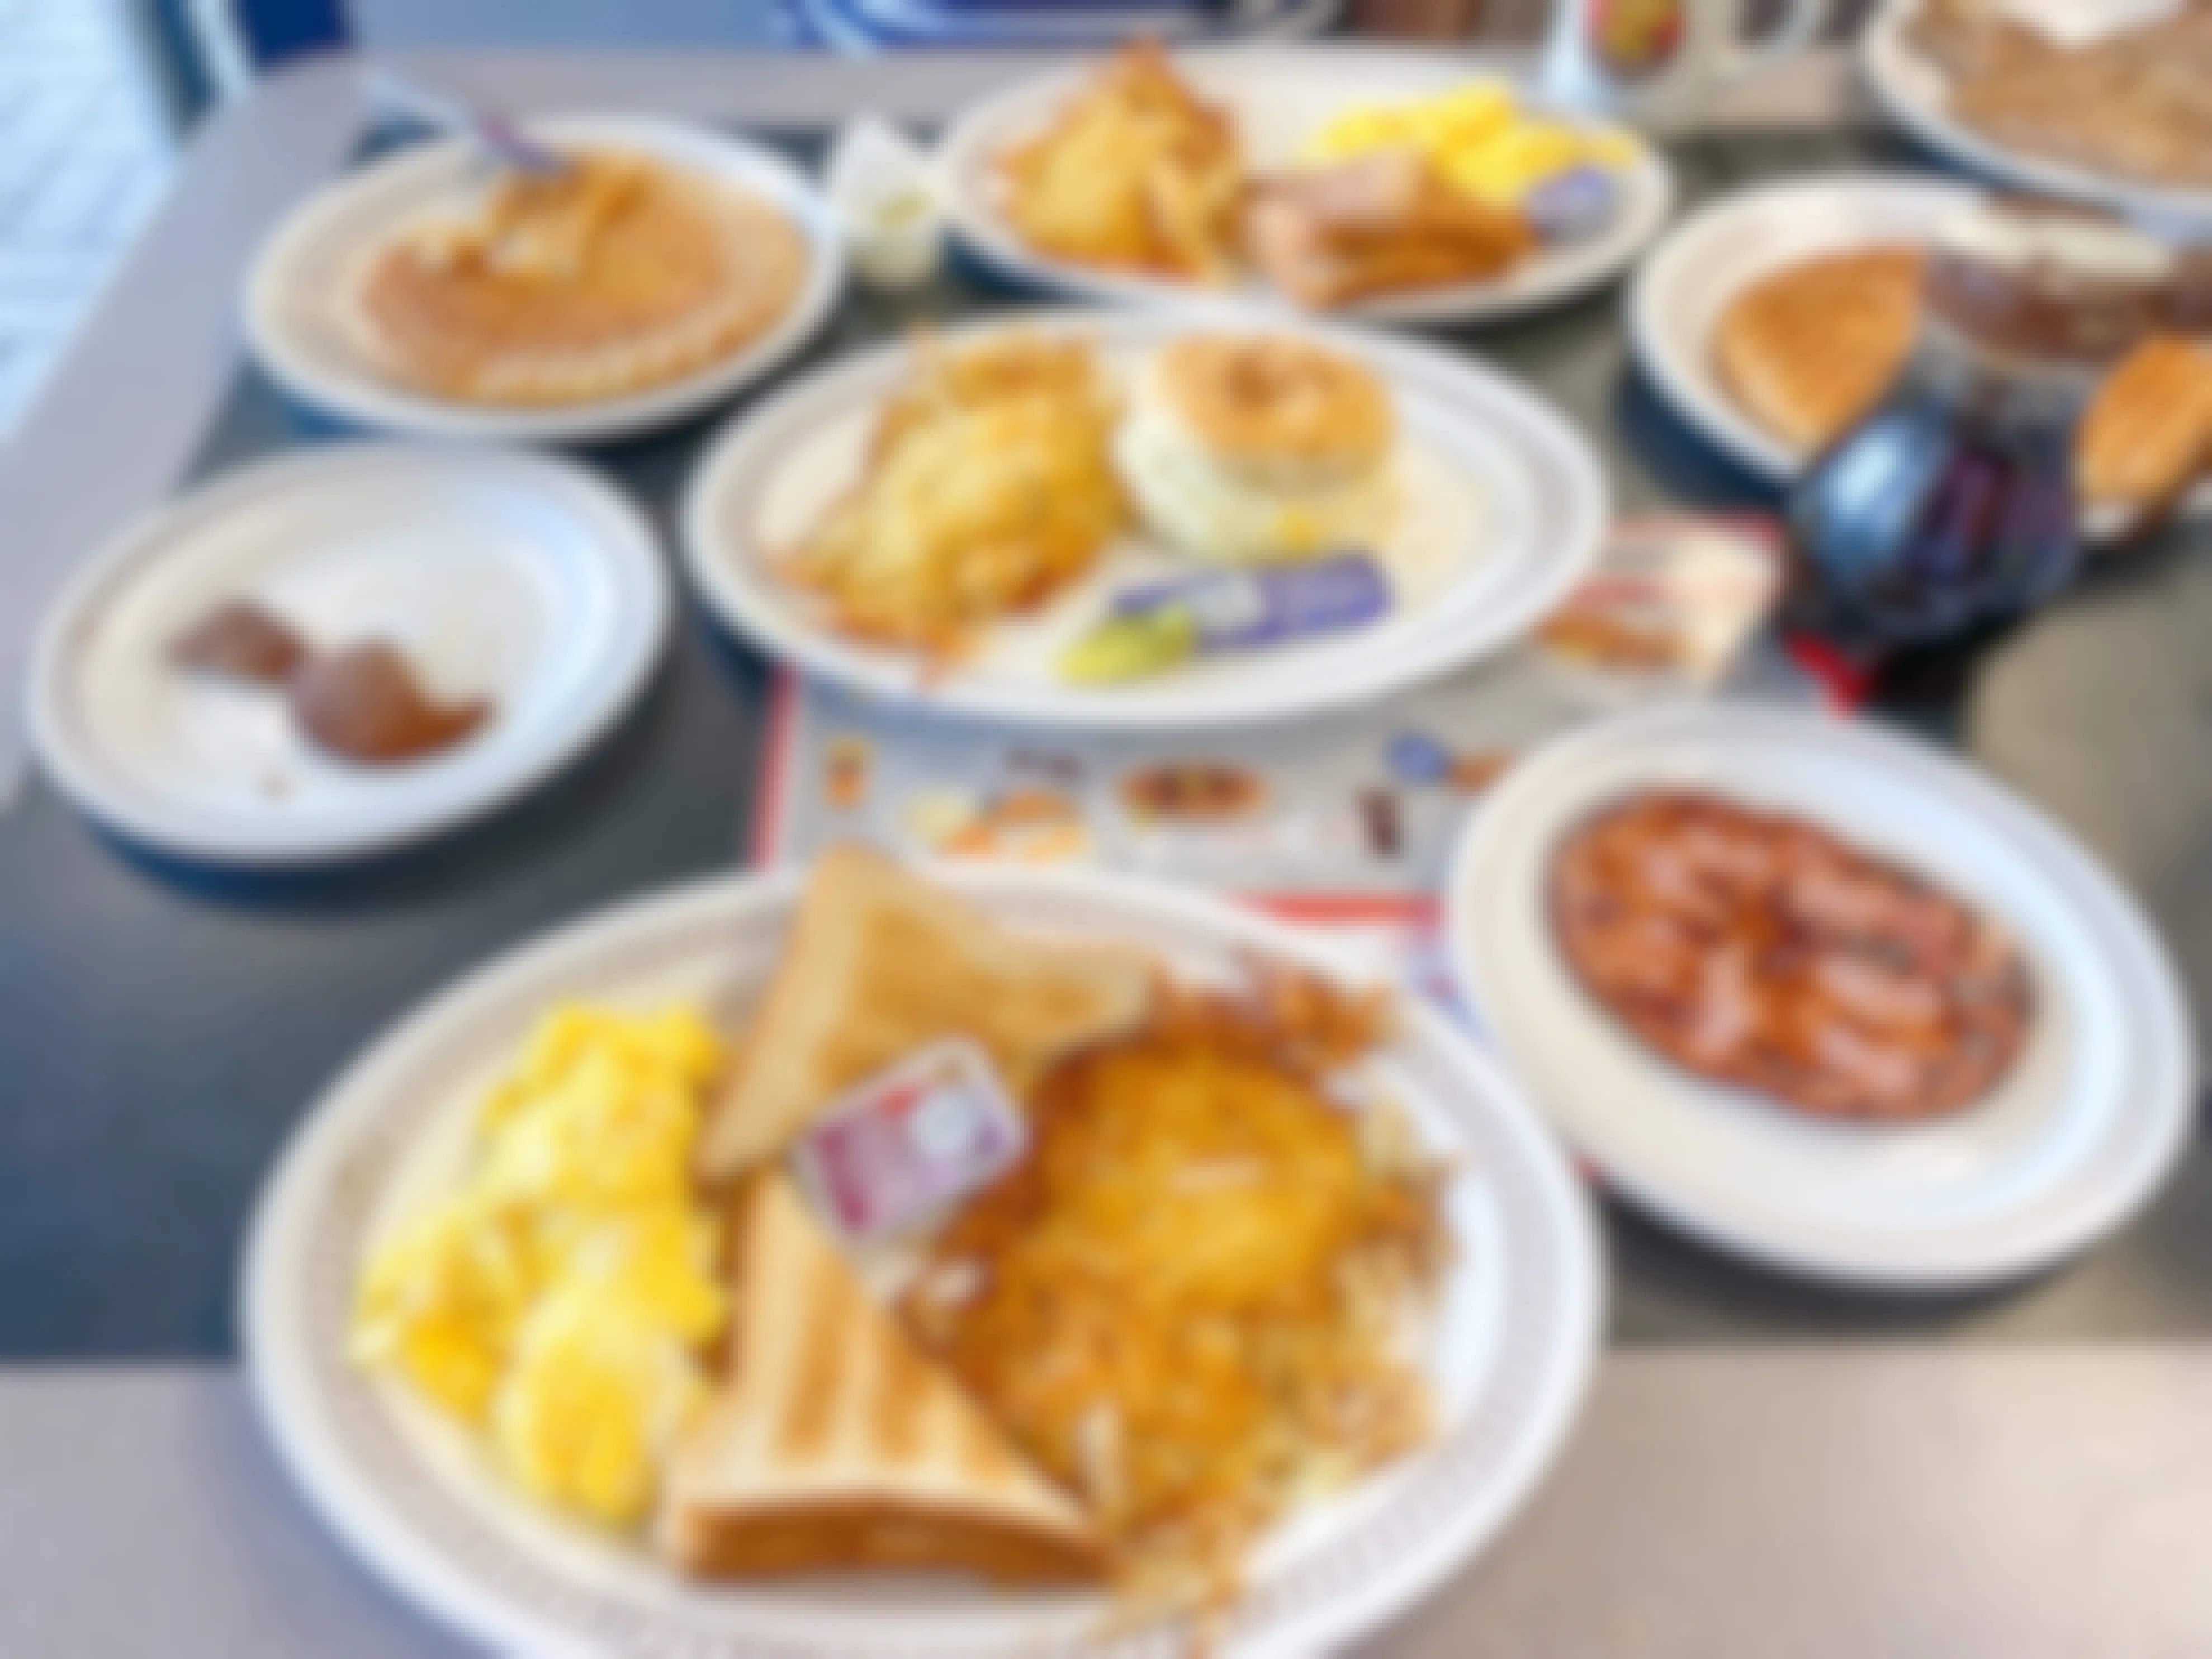 A Waffle House table covered in plates of breakfast food.